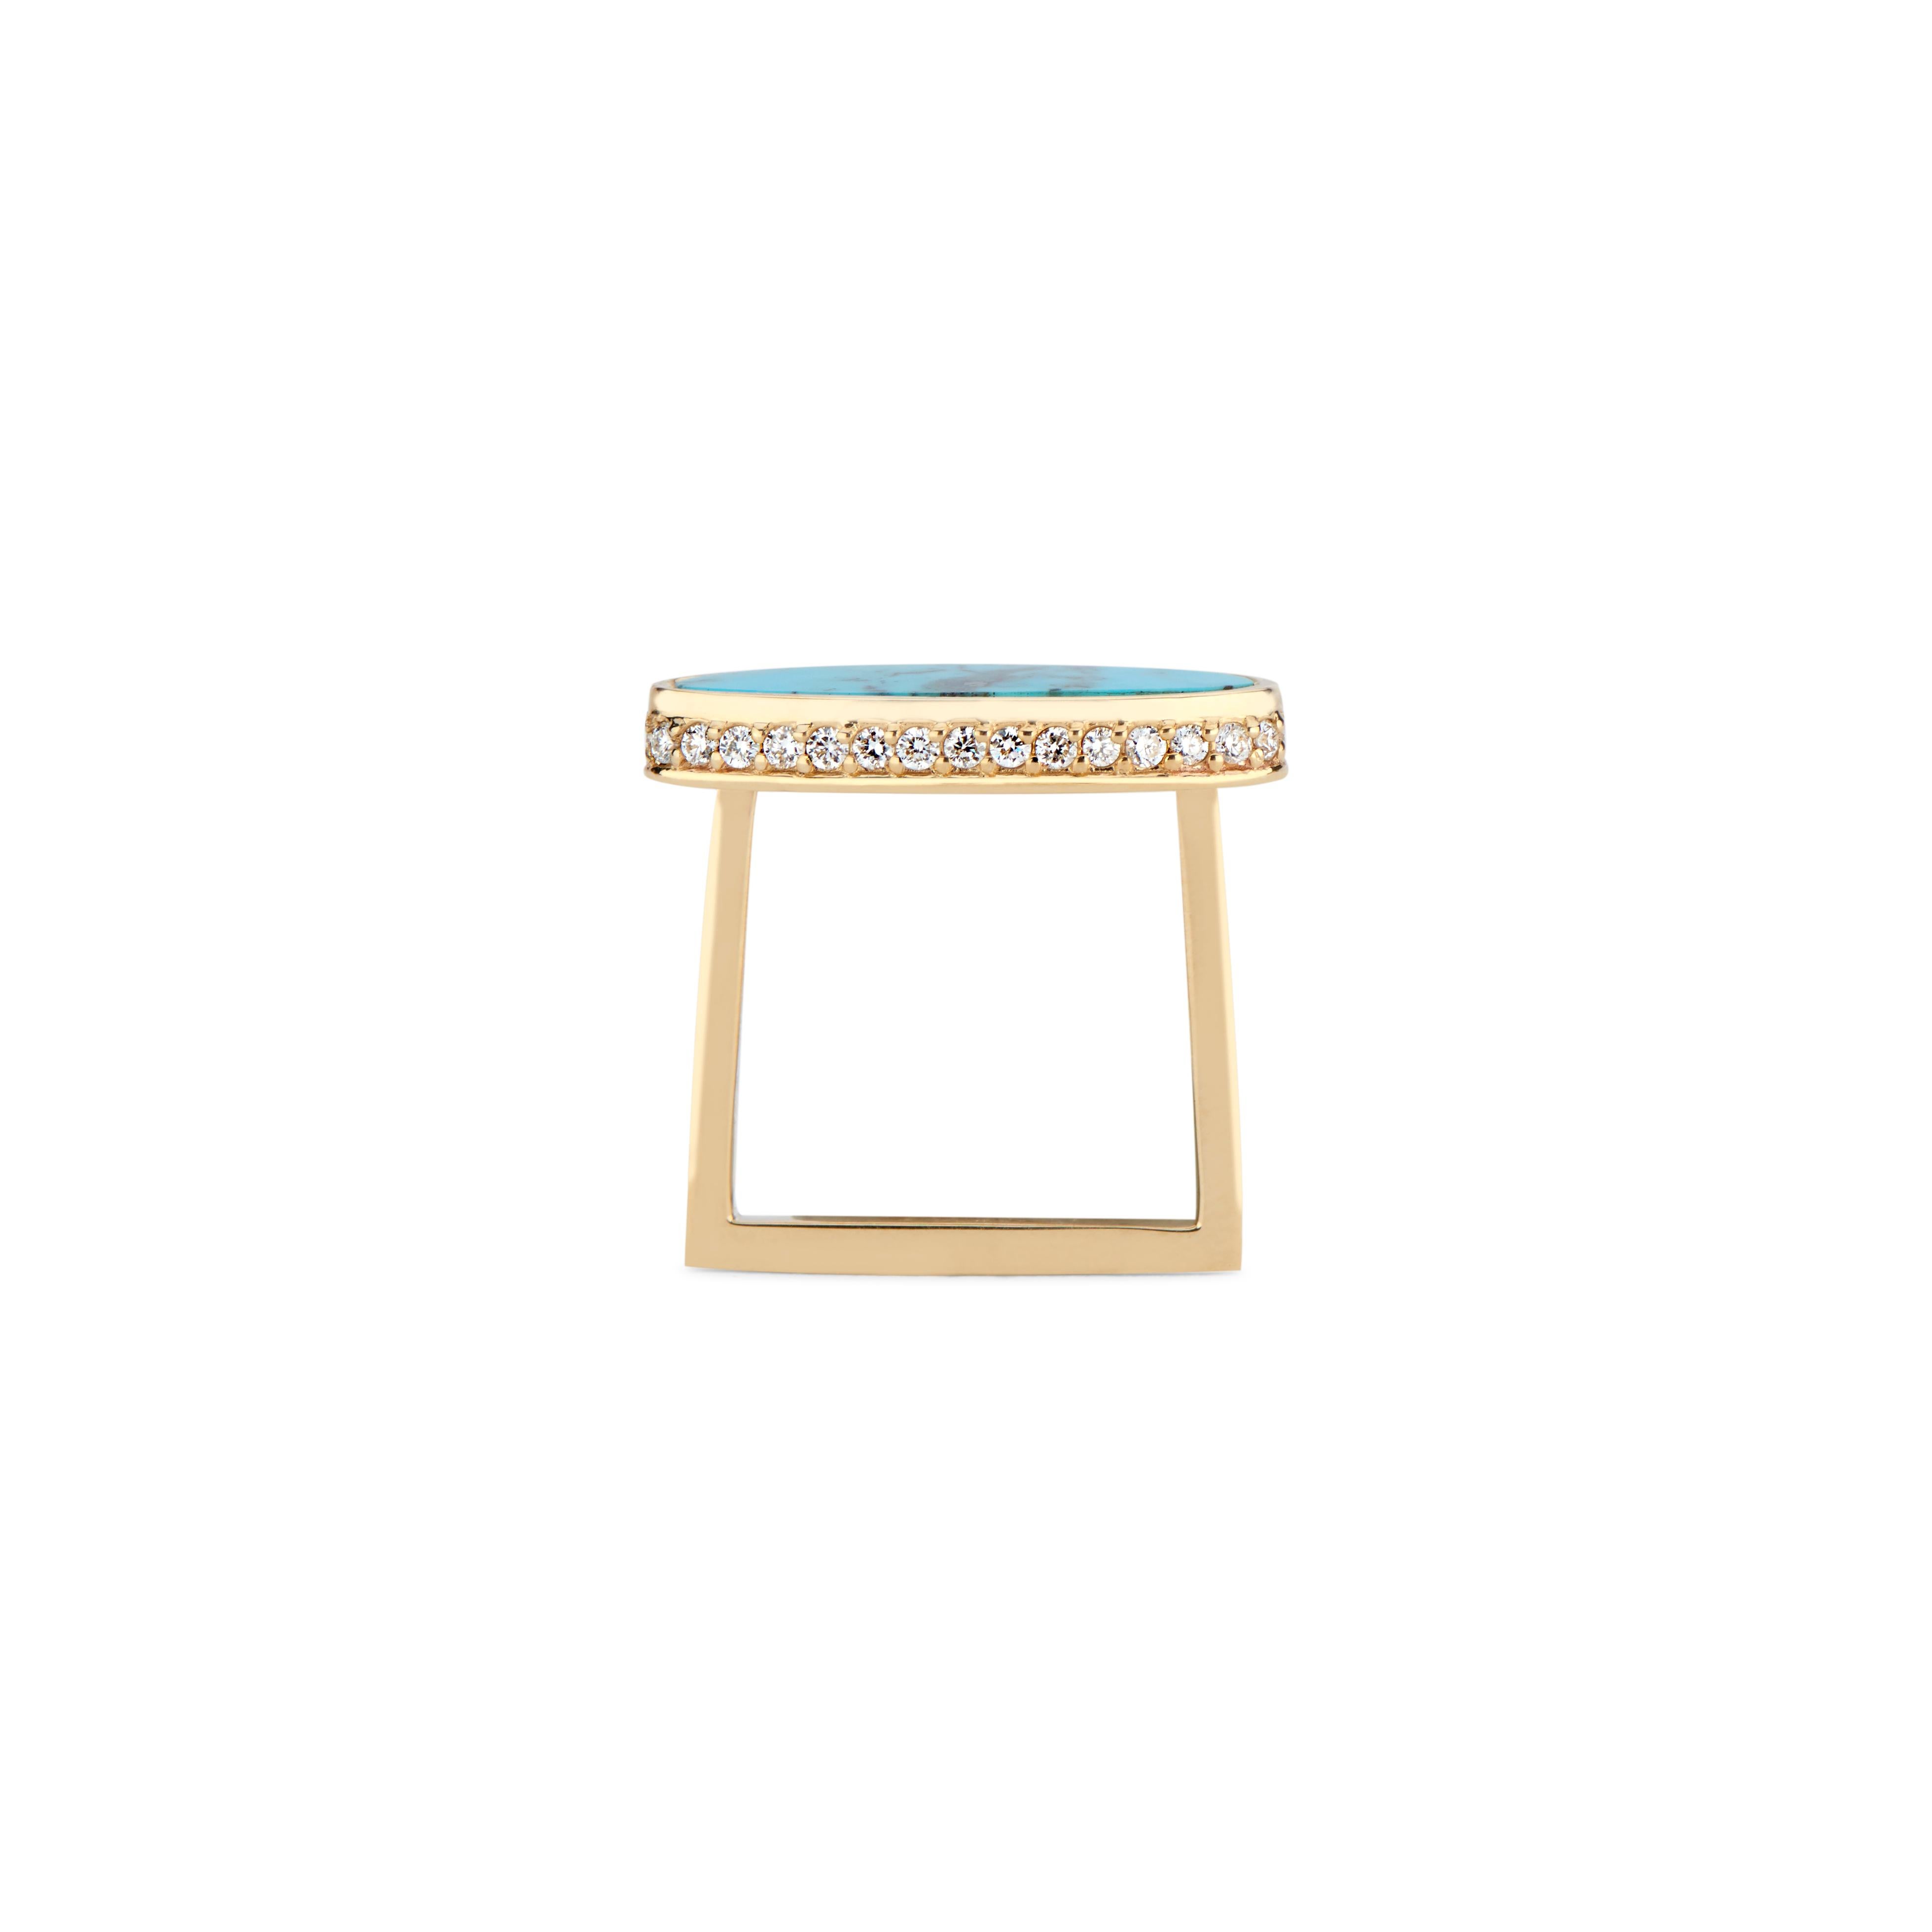 This 14k yellow gold ring features a beautiful turquoise set in the center and surrounded by a halo of 34 white diamonds. It is a thoroughly contemporary style with feminine details.  The shank's unique shape is incredibly lightweight and